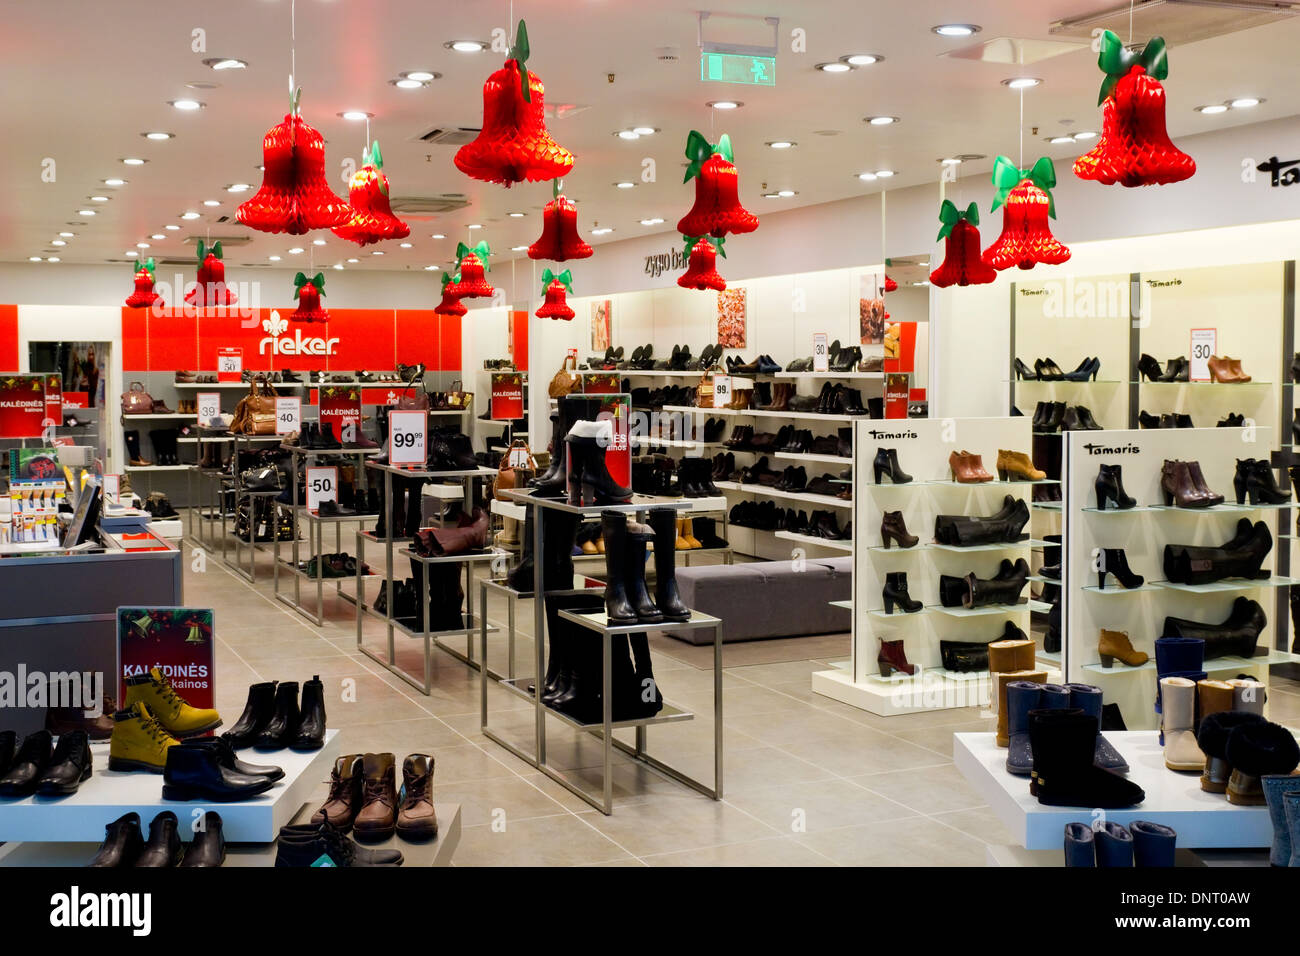 Christmas Reiker and Tamaris shoes shop in the Panorama shopping centre in  Vilnius on December 21, 2013 Stock Photo - Alamy